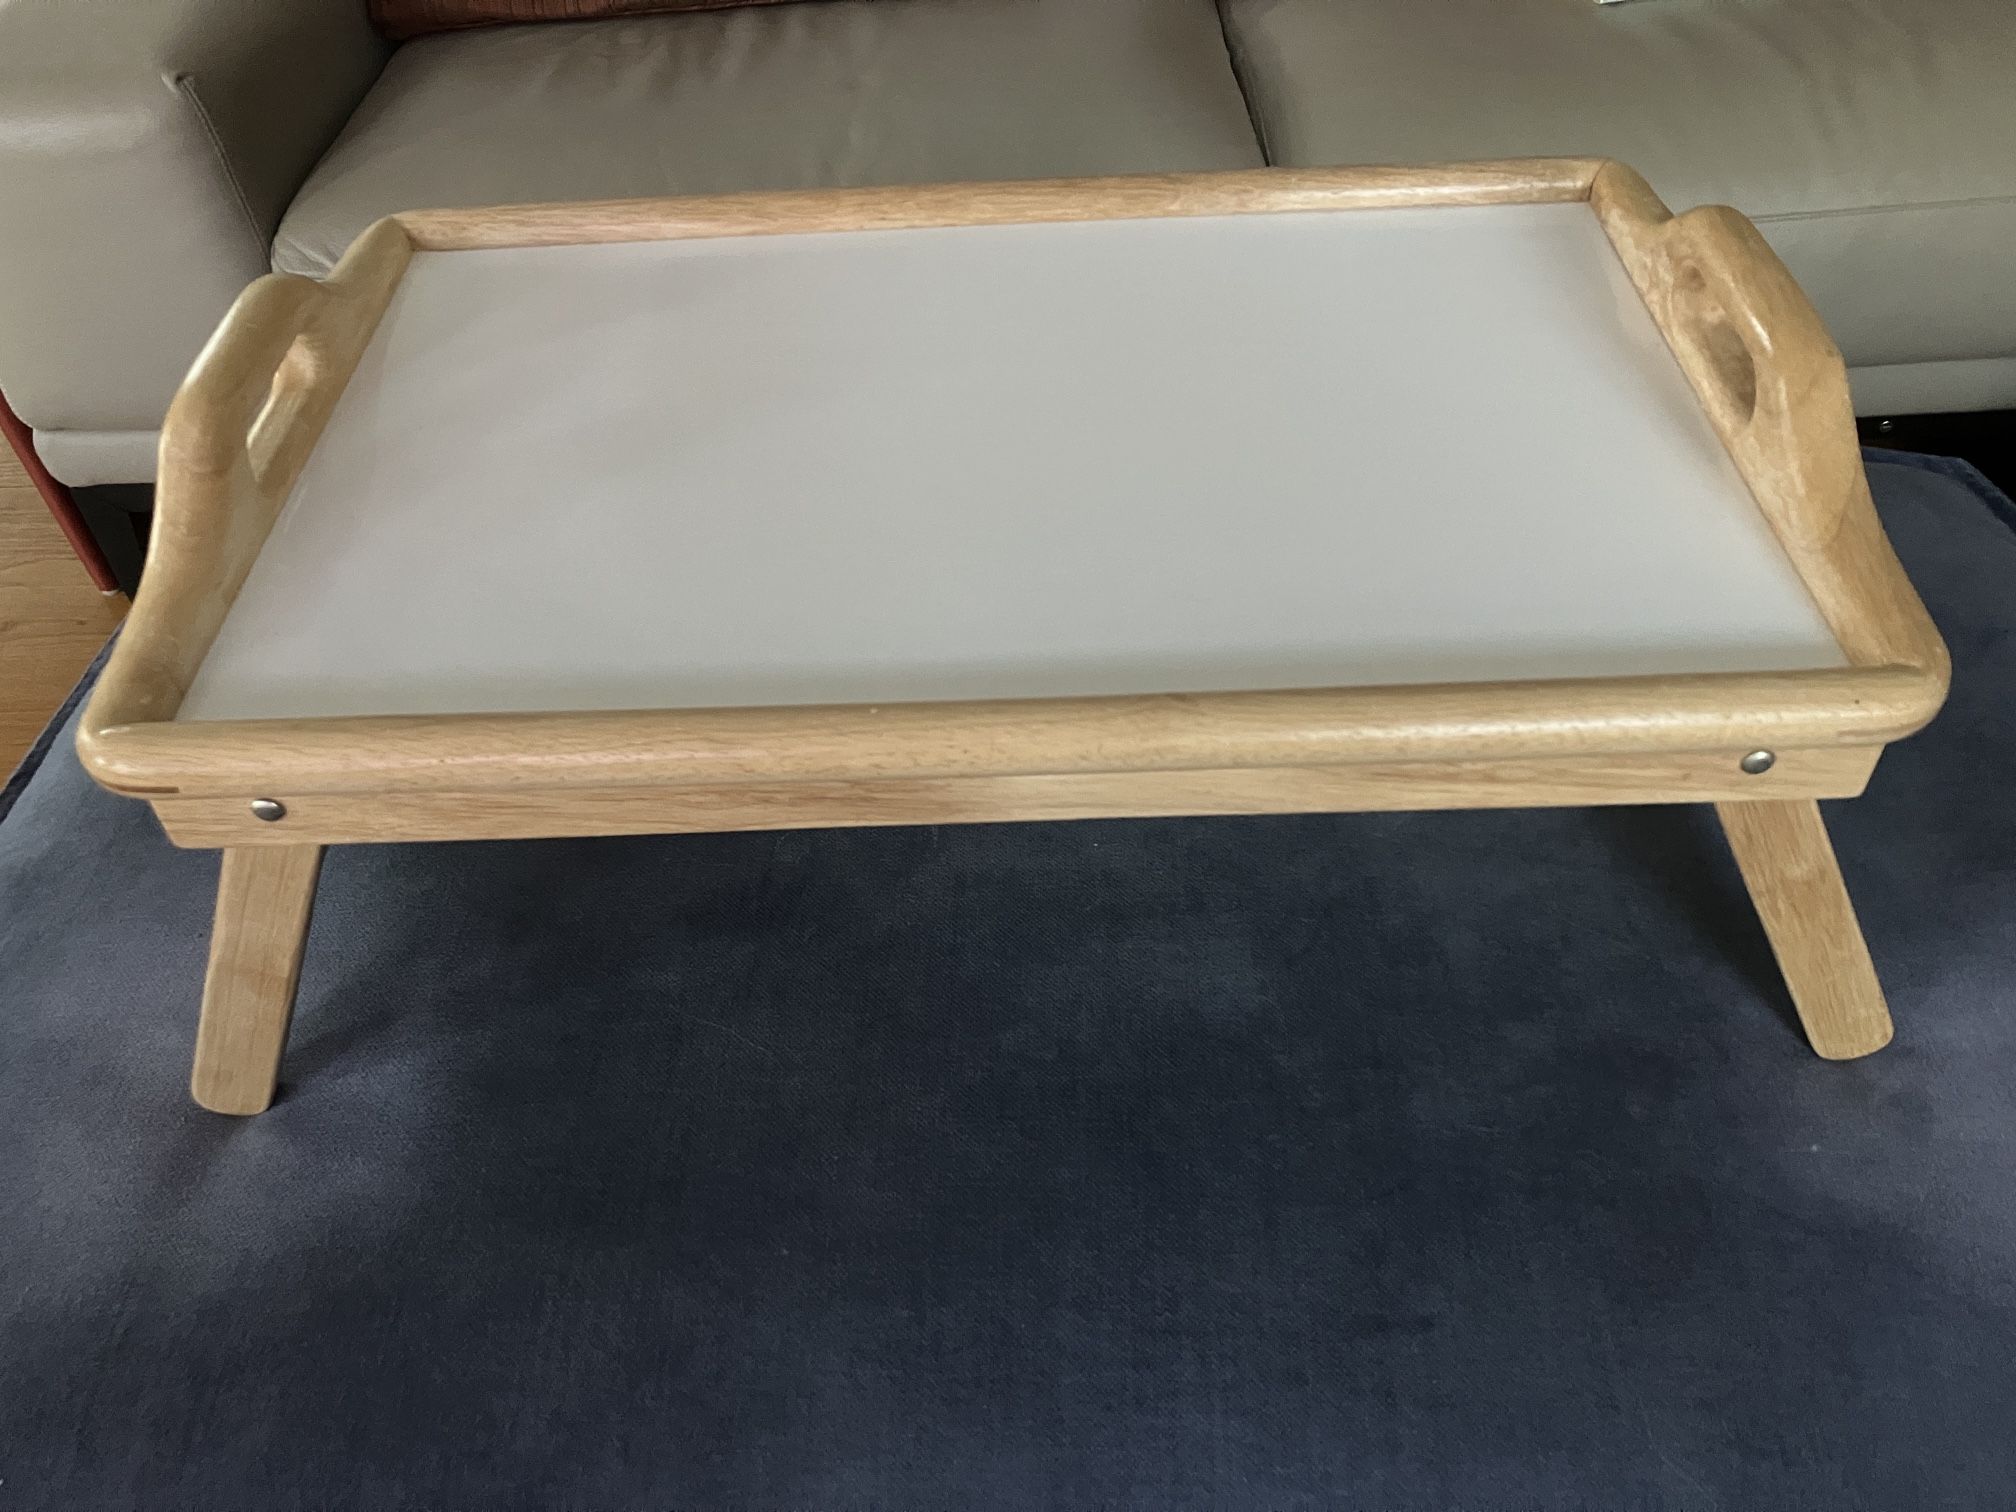 Wooden Foldable Bed TV Coffee Table Serving Tray Oak